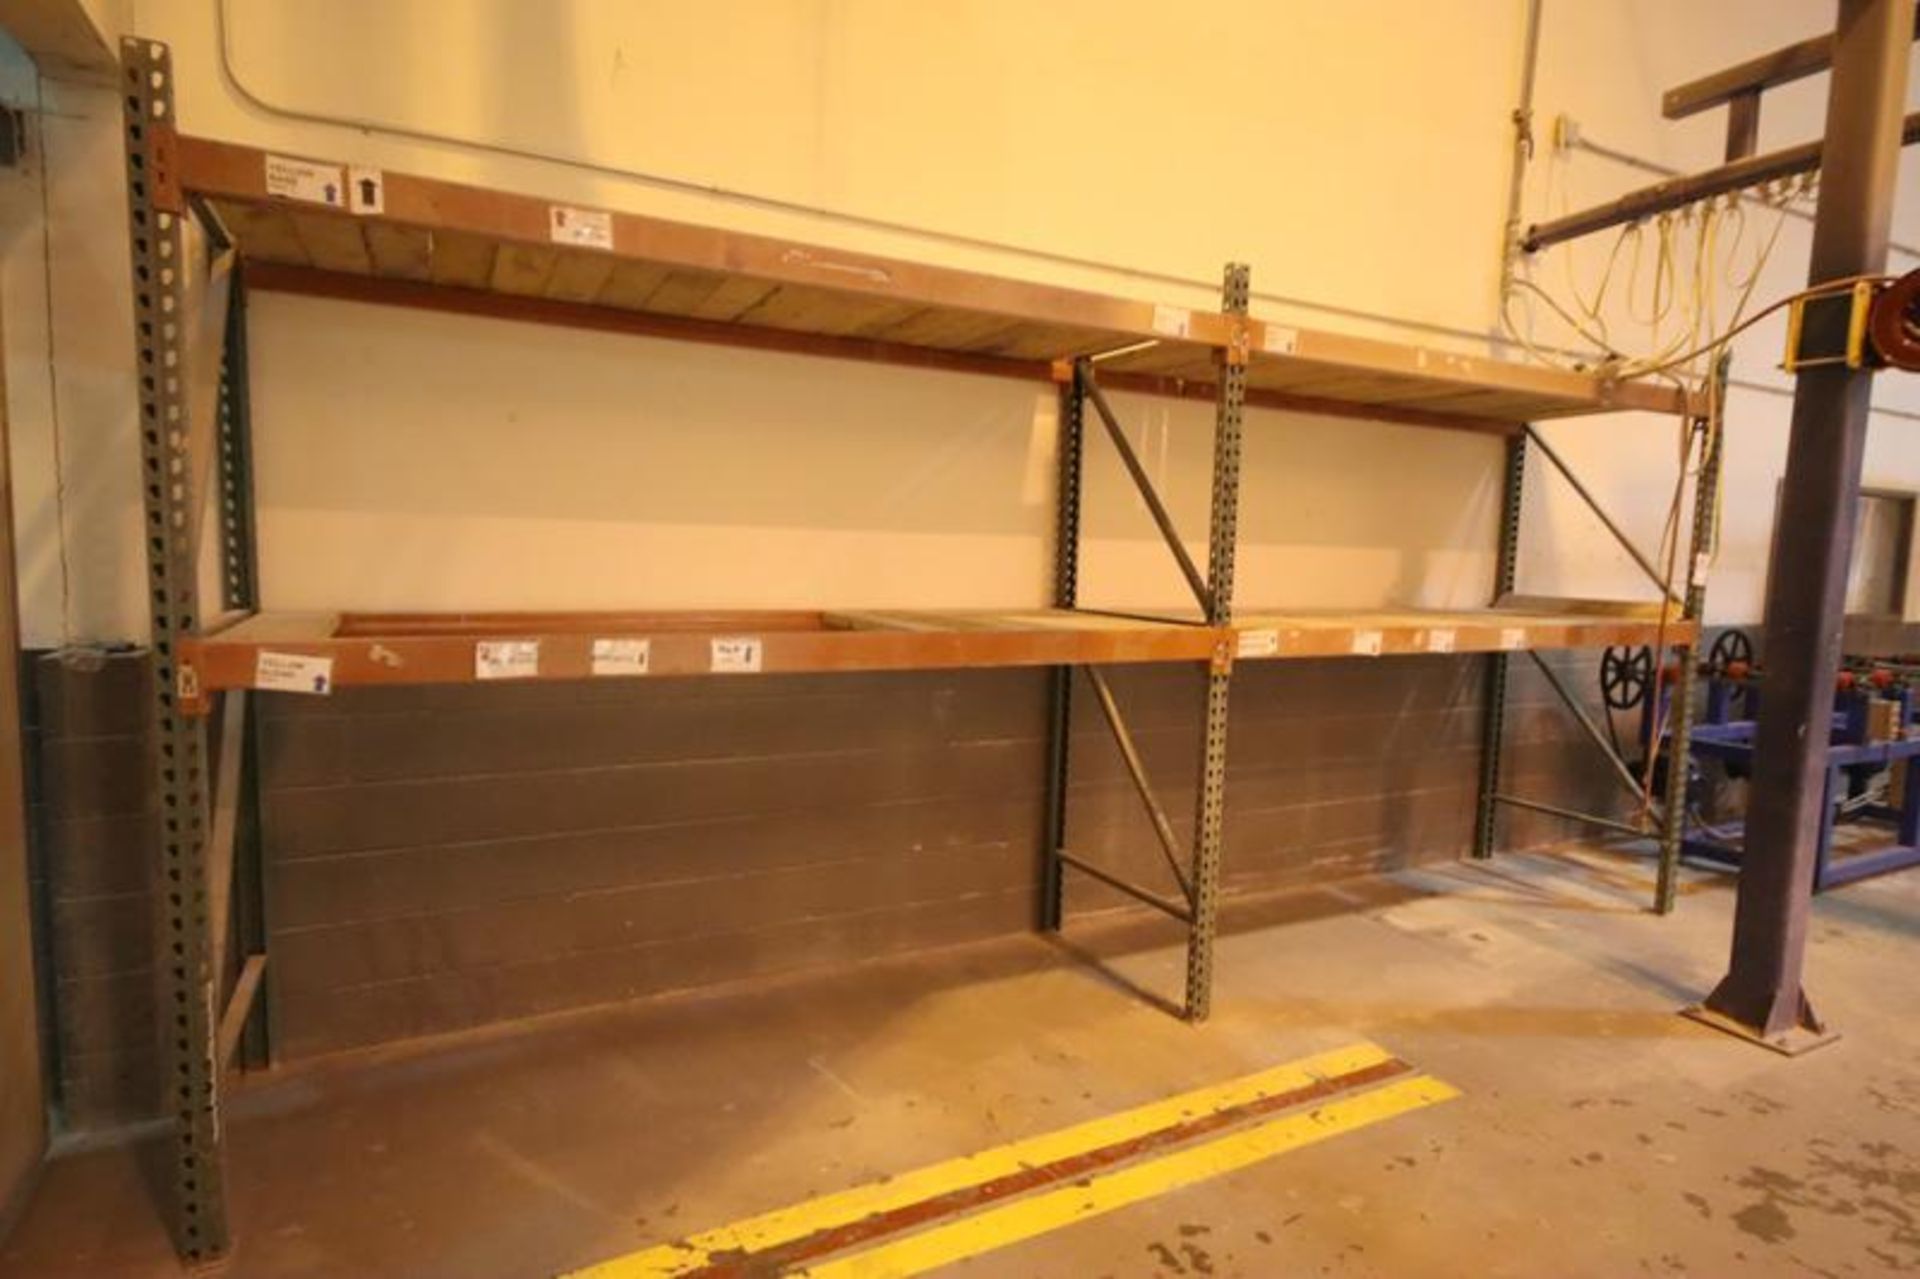 2-Sections of Pallet Racking, (3) Uprights 8'x36", (8) Cross Beams 102", Wood Decking